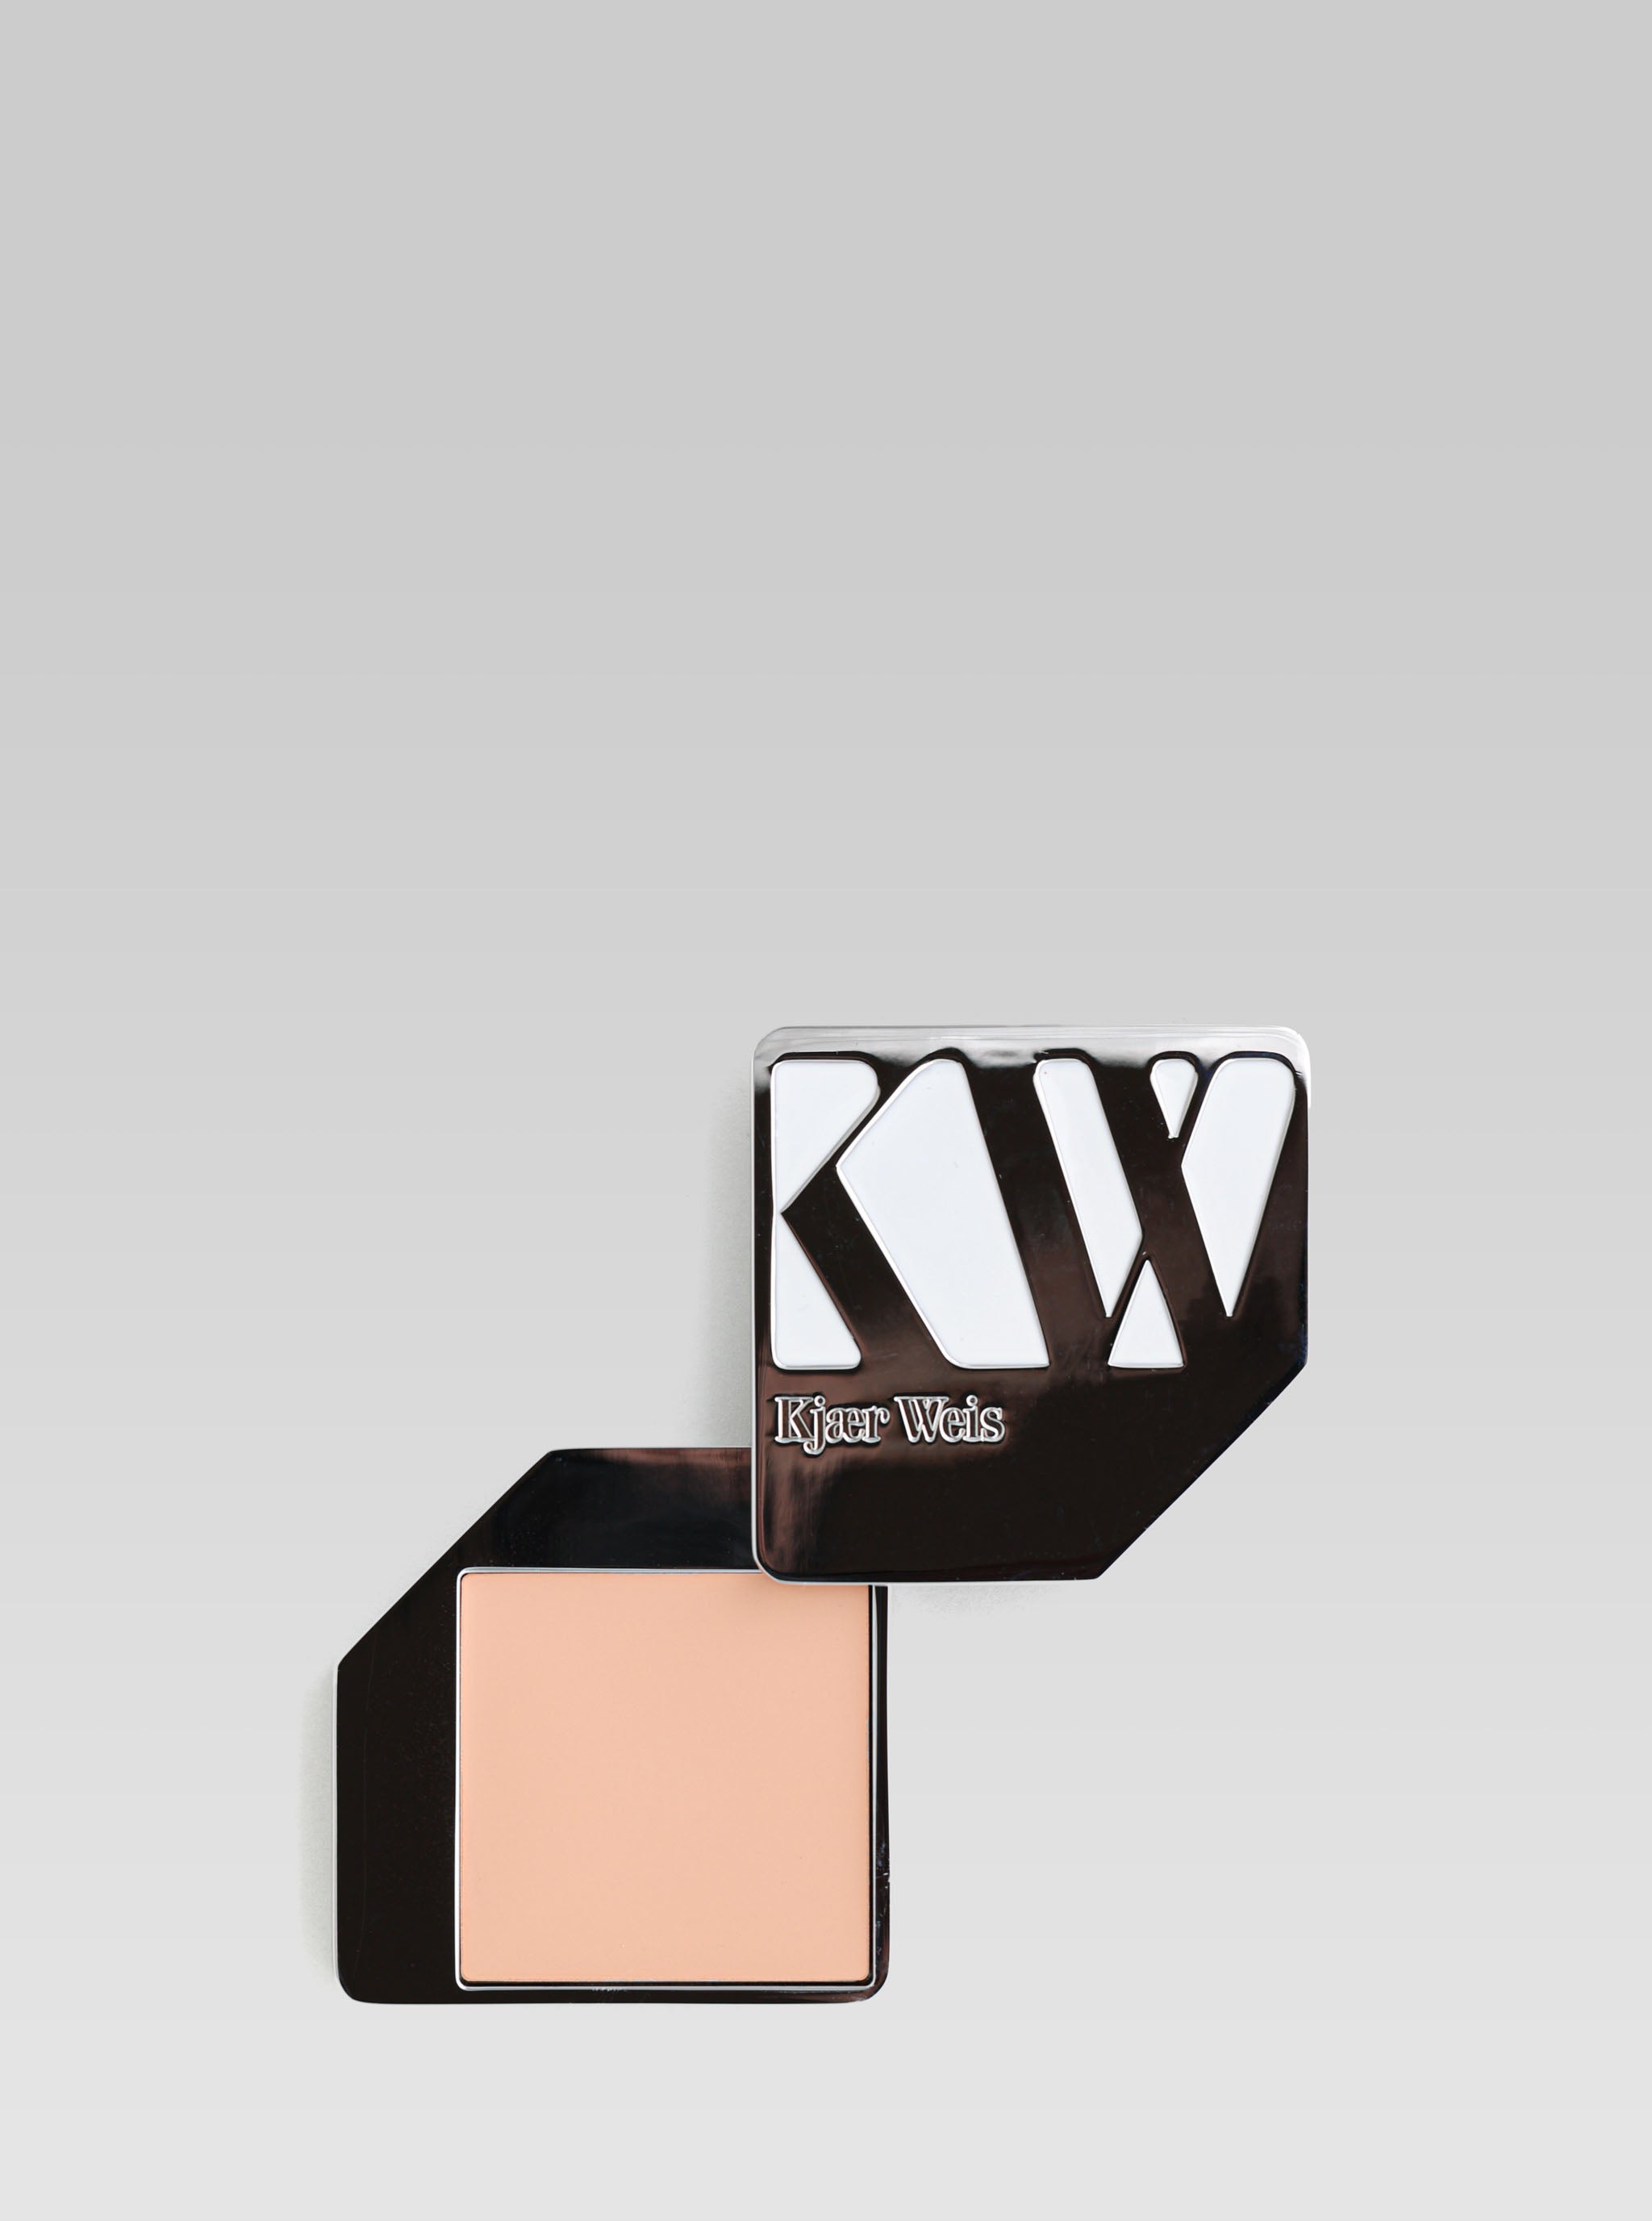 KJAER WEIS Foundation in Paper Thin product shot